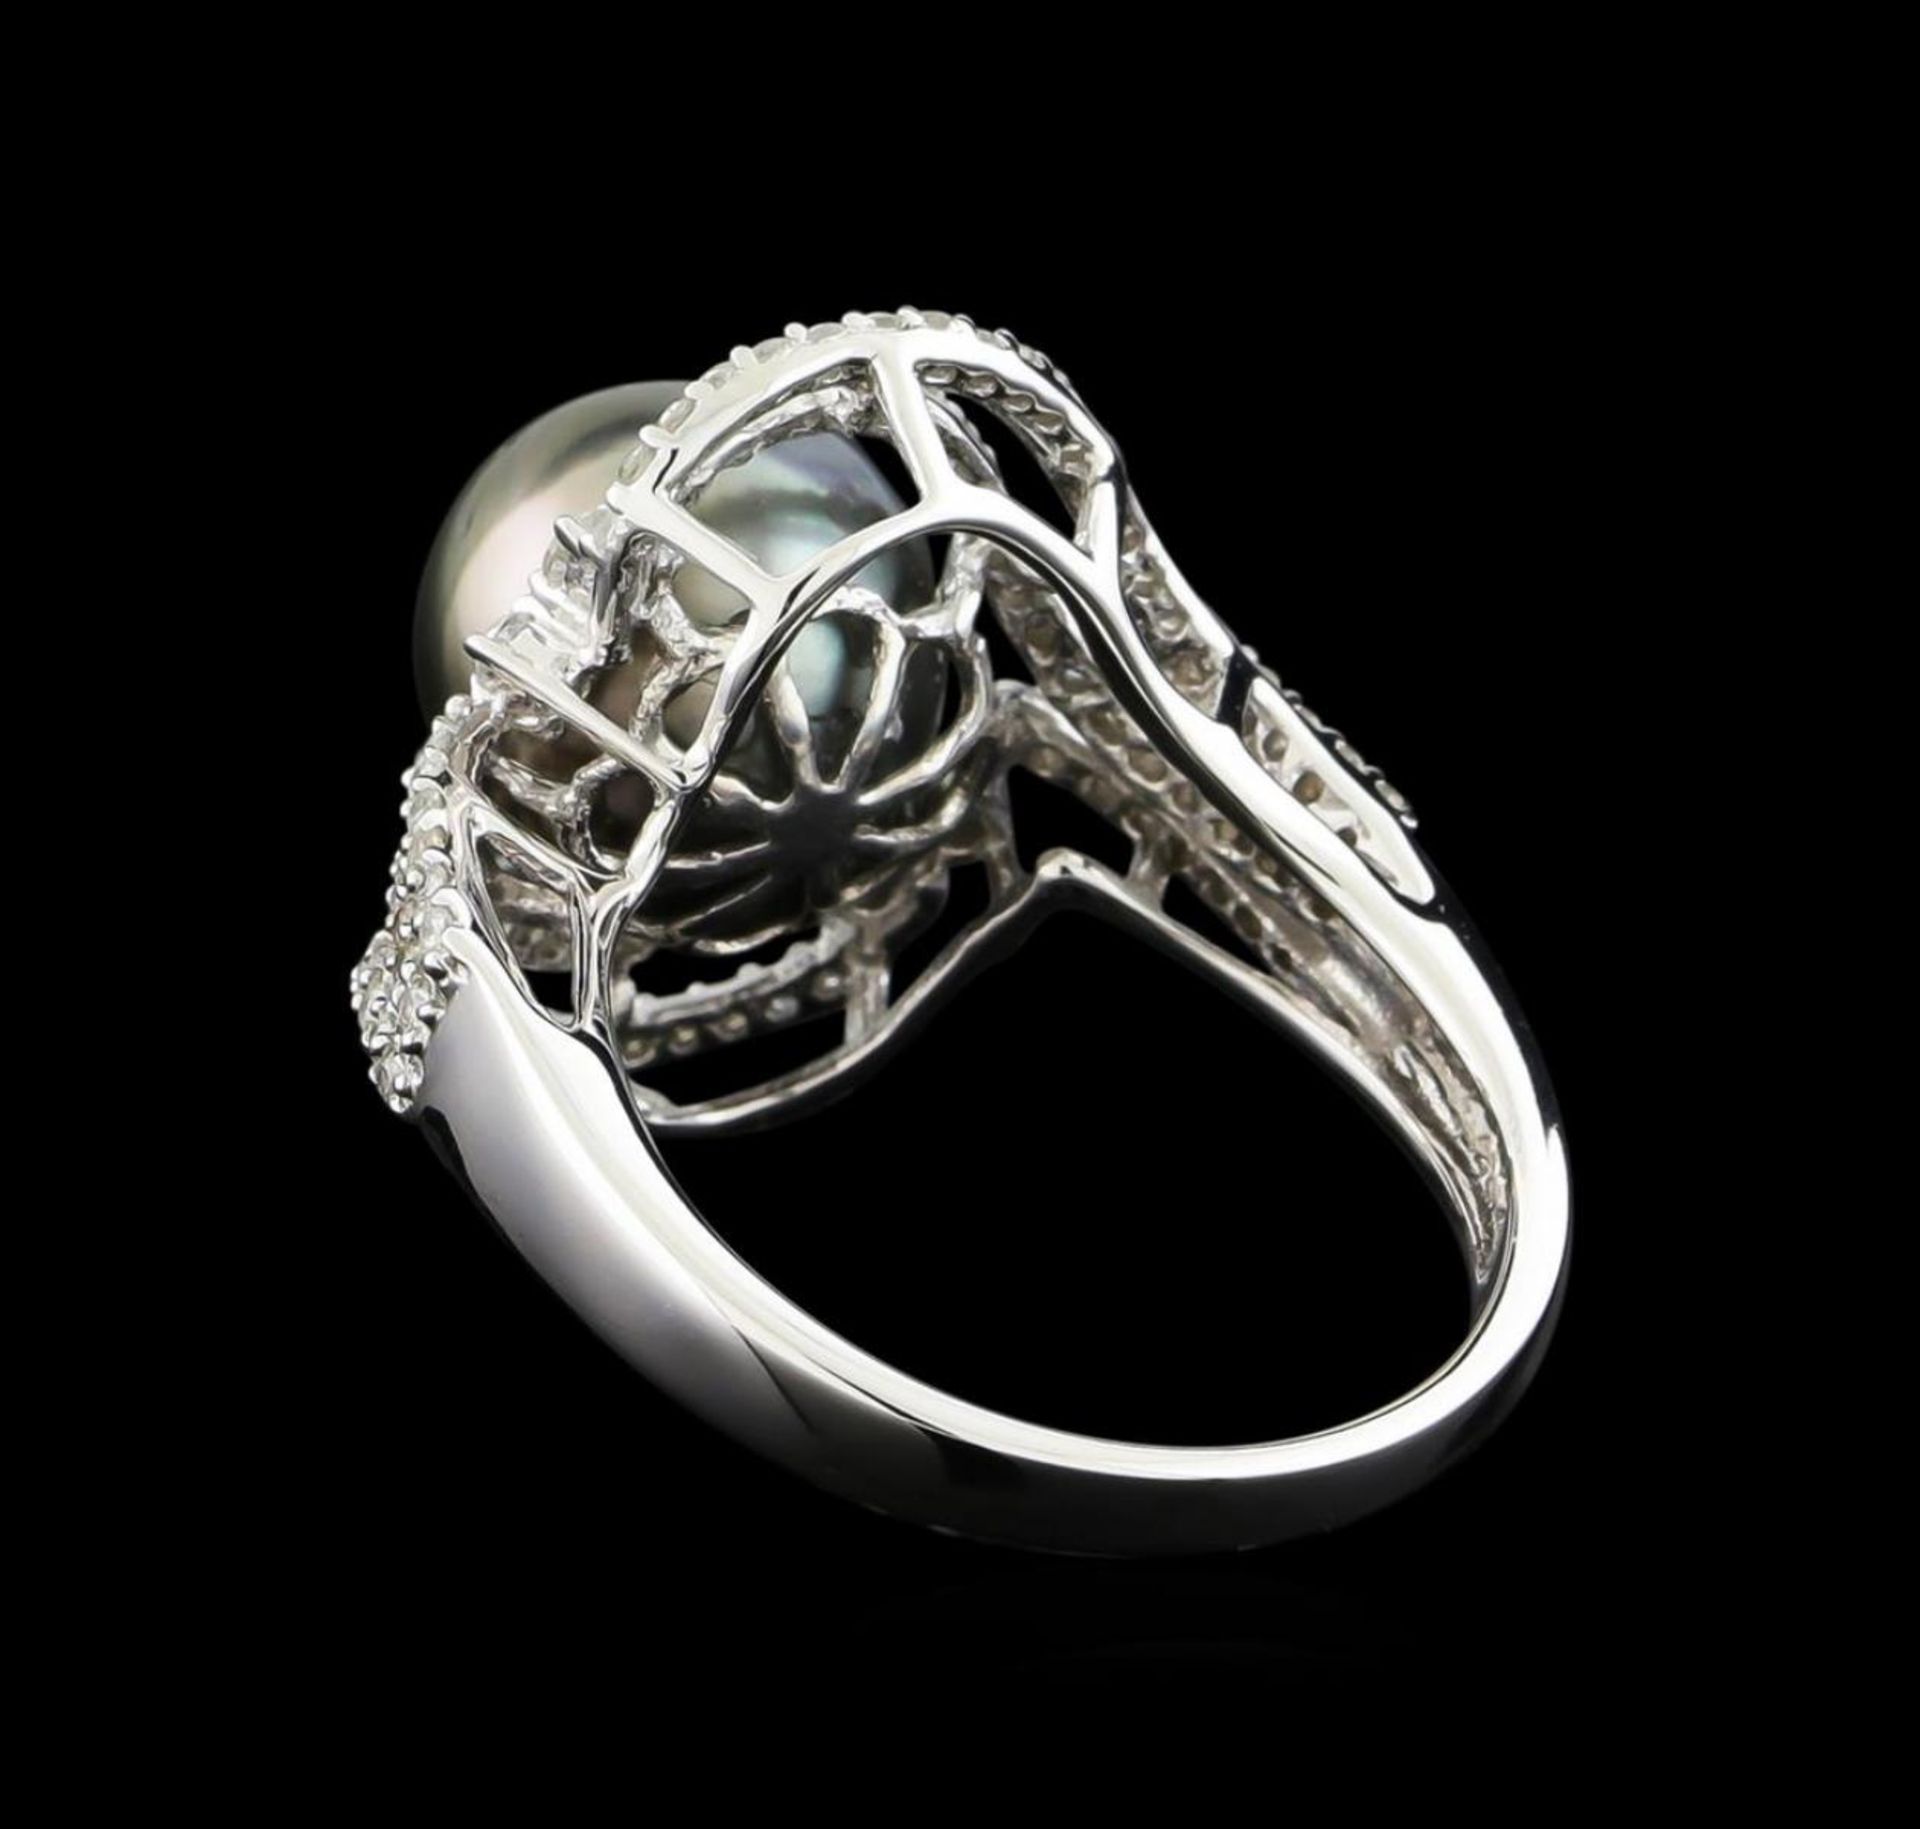 14KT White Gold Pearl and Diamond Ring - Image 3 of 5